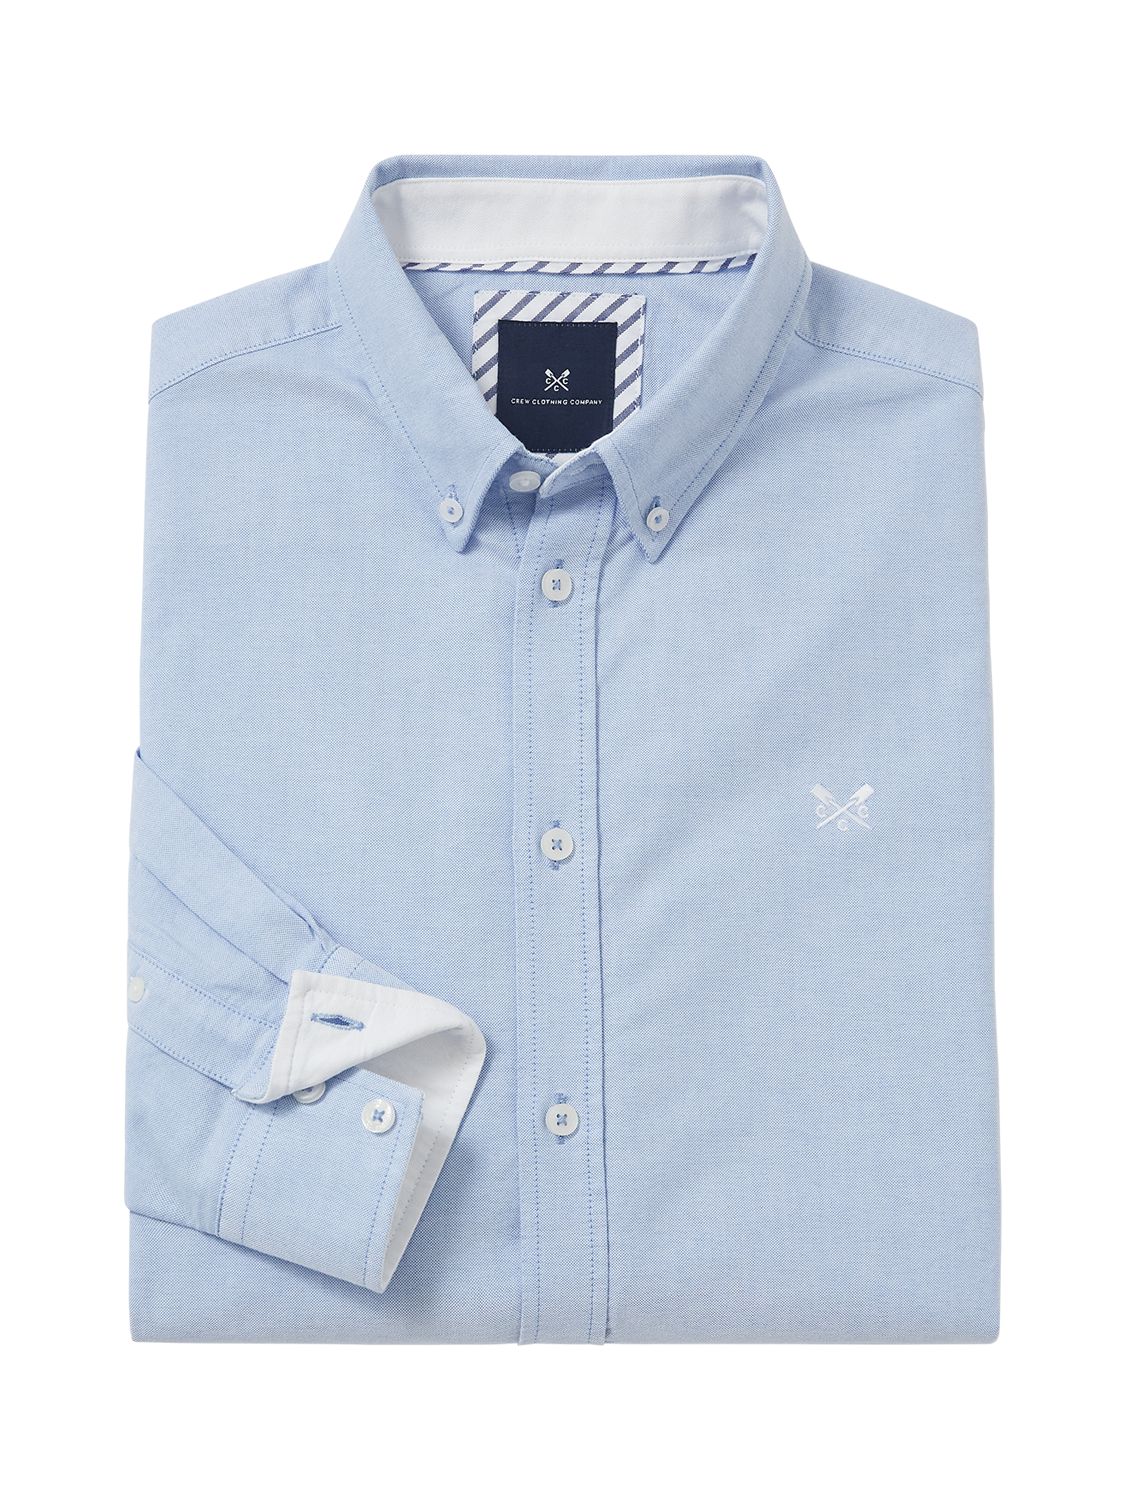 Crew Clothing Classic Fit Oxford Shirt, Sky Blue, XS